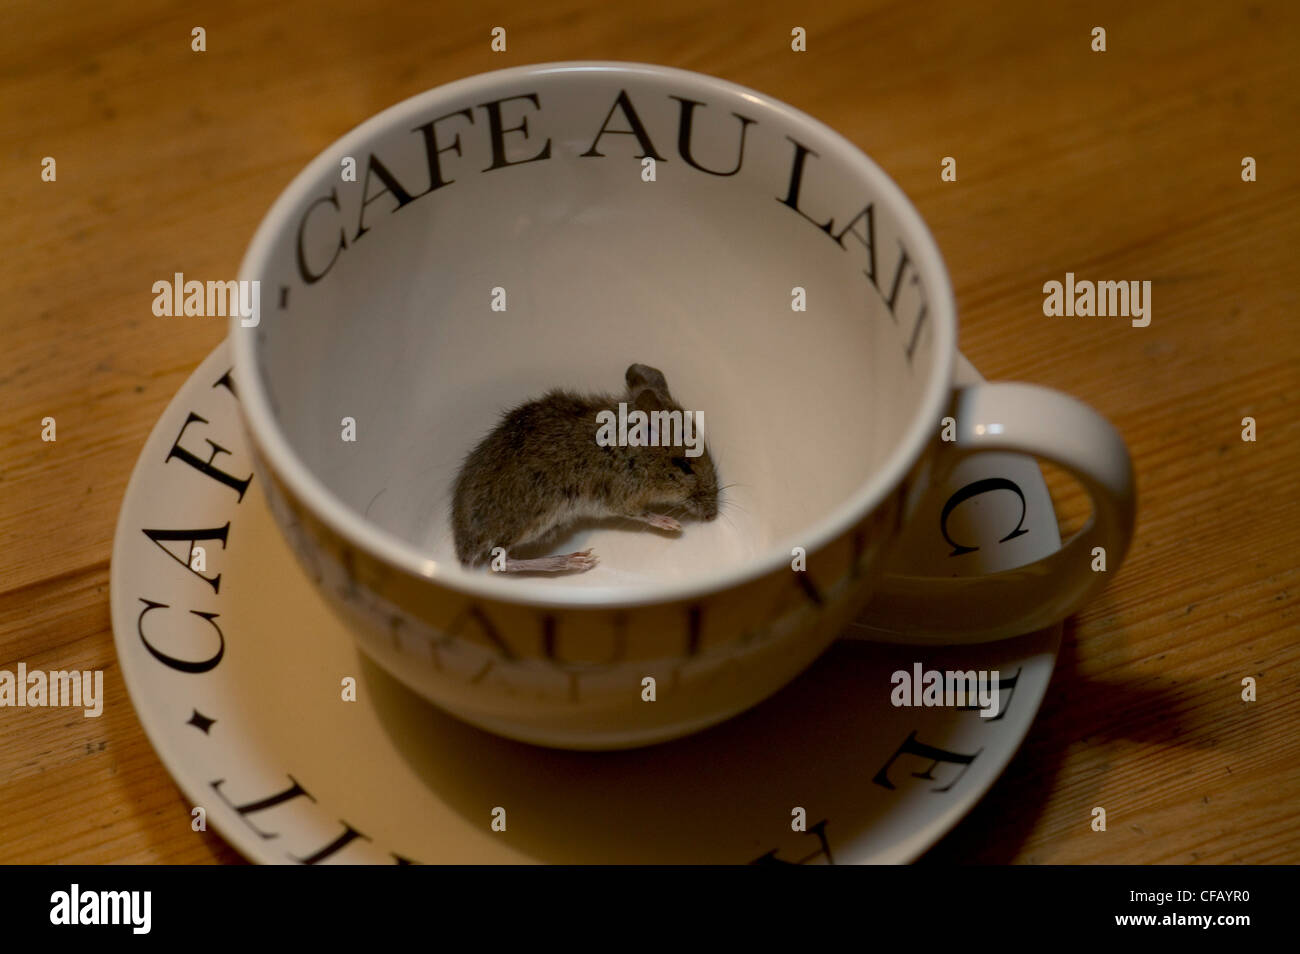 Dead mouse in coffee cup. Stock Photo